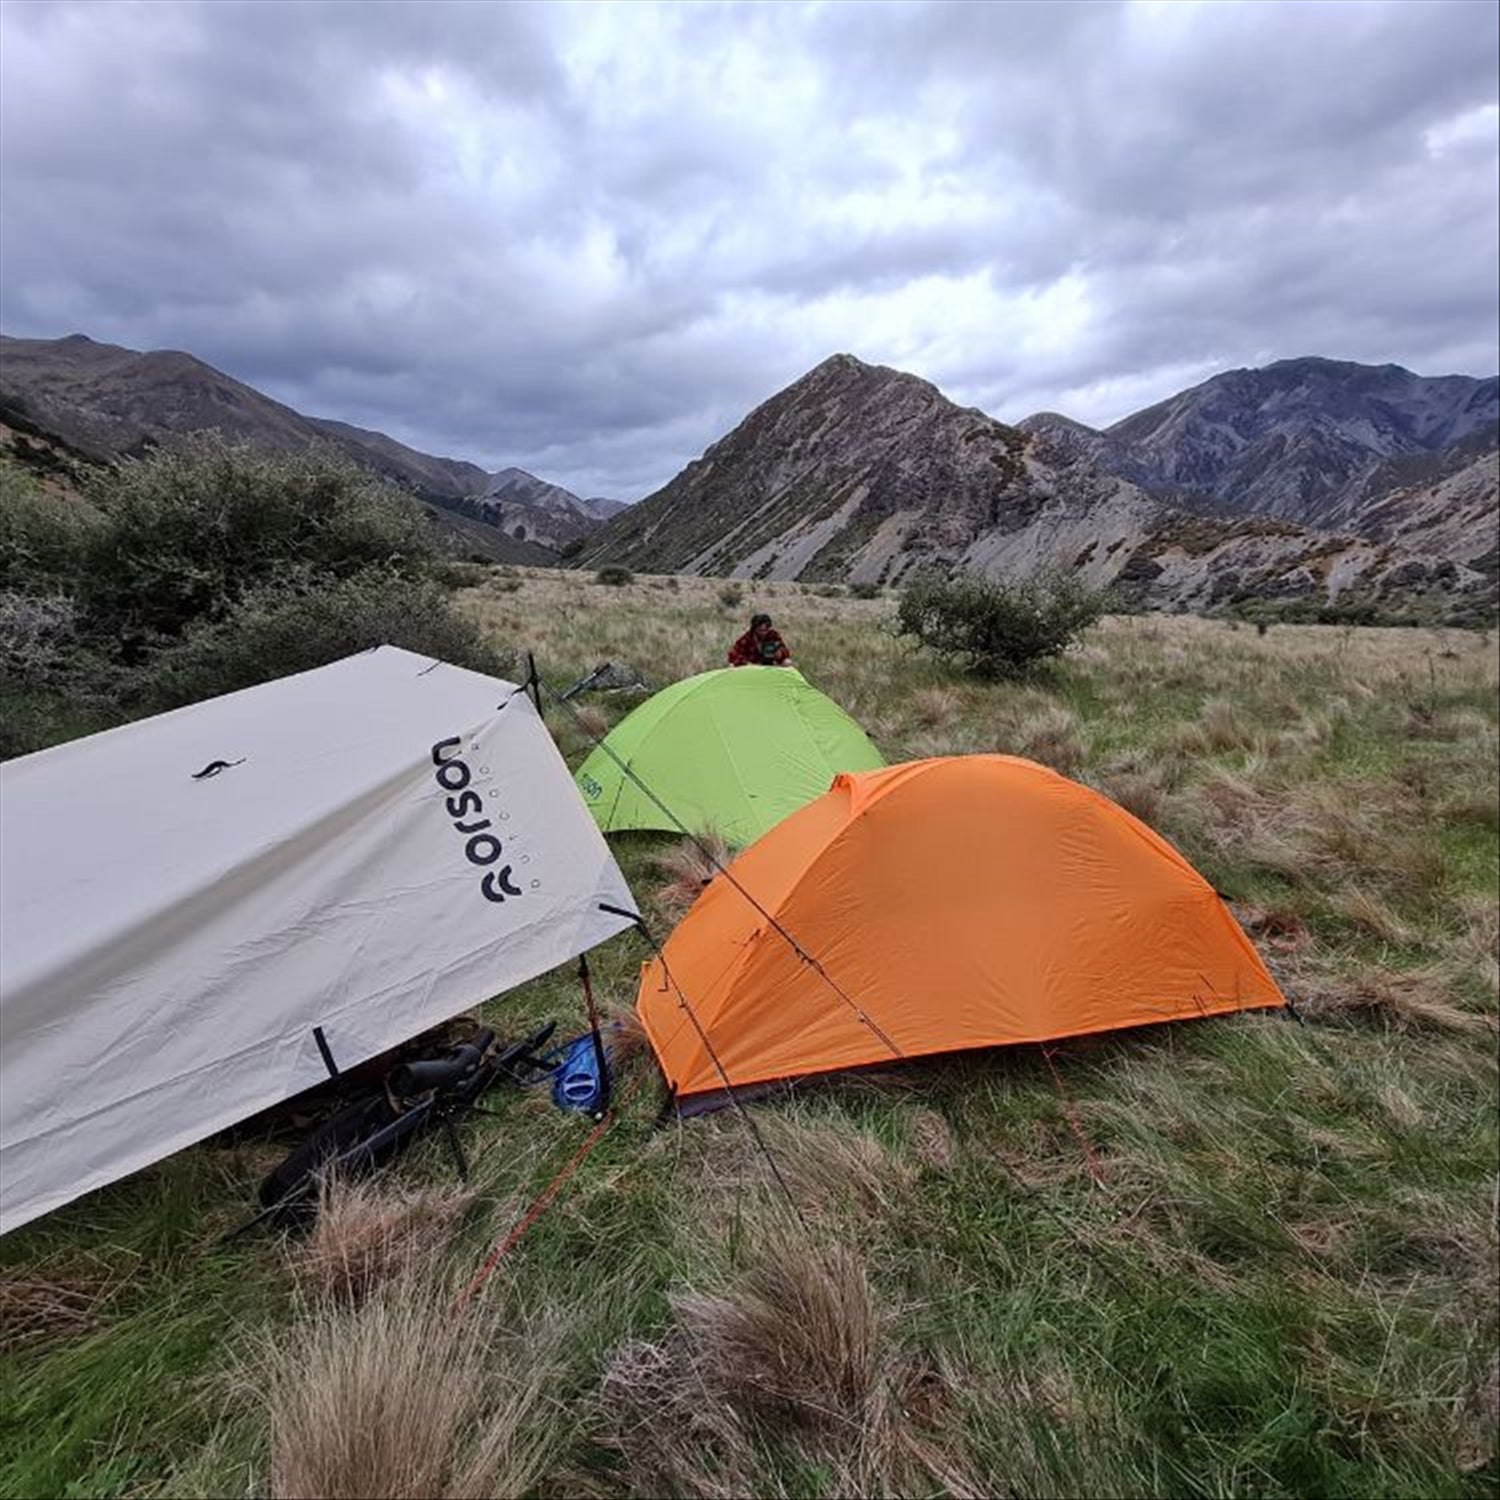 Ace 1 - 'All Weather' Lightweight 1 Person Hiking Tent 2.15kg